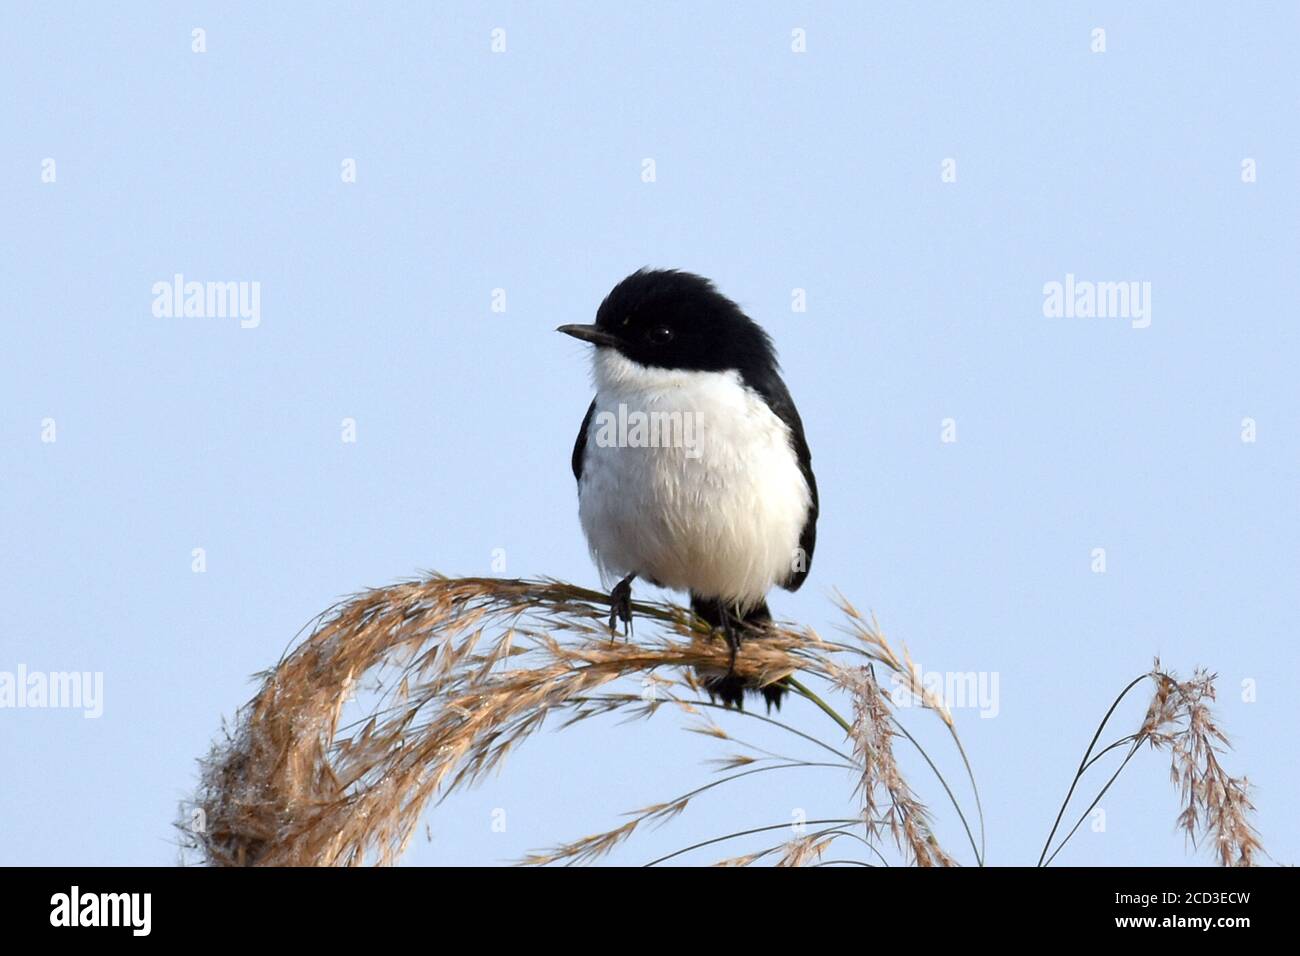 jerdon's bushchat (Saxicola jerdoni), purched at the top of a reed stem at Lake Inle, Burma Stock Photo